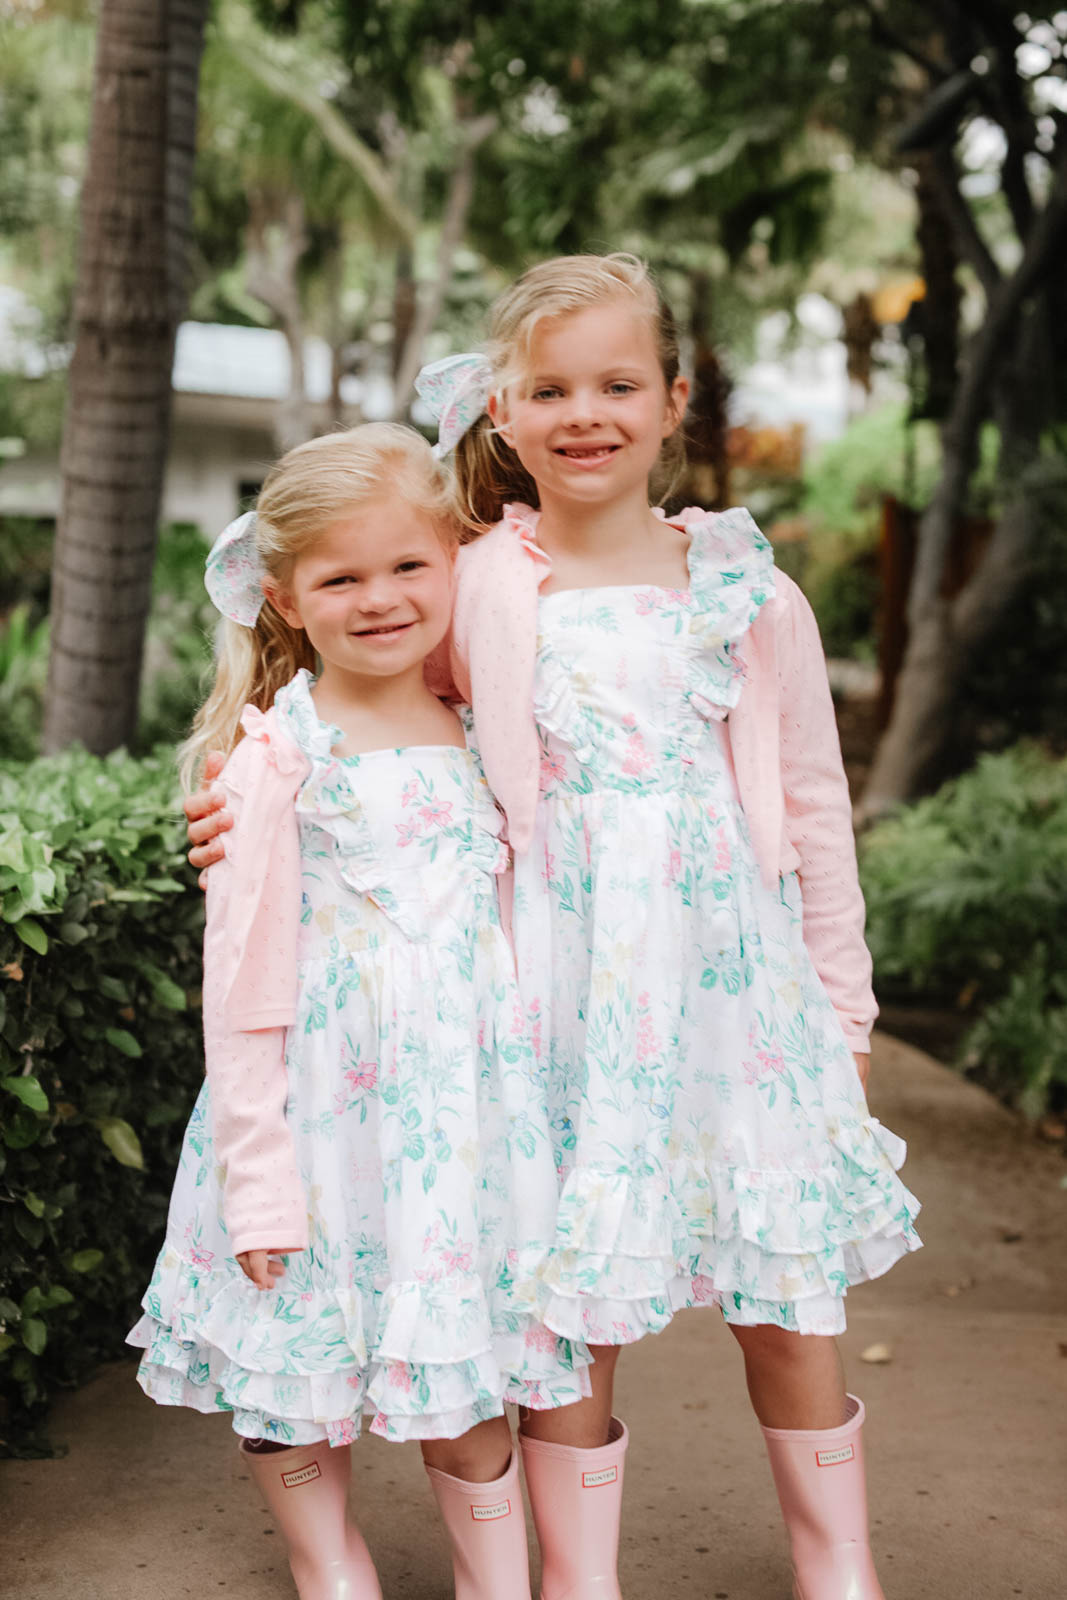 Matching Easter outfits from Janie and Jack